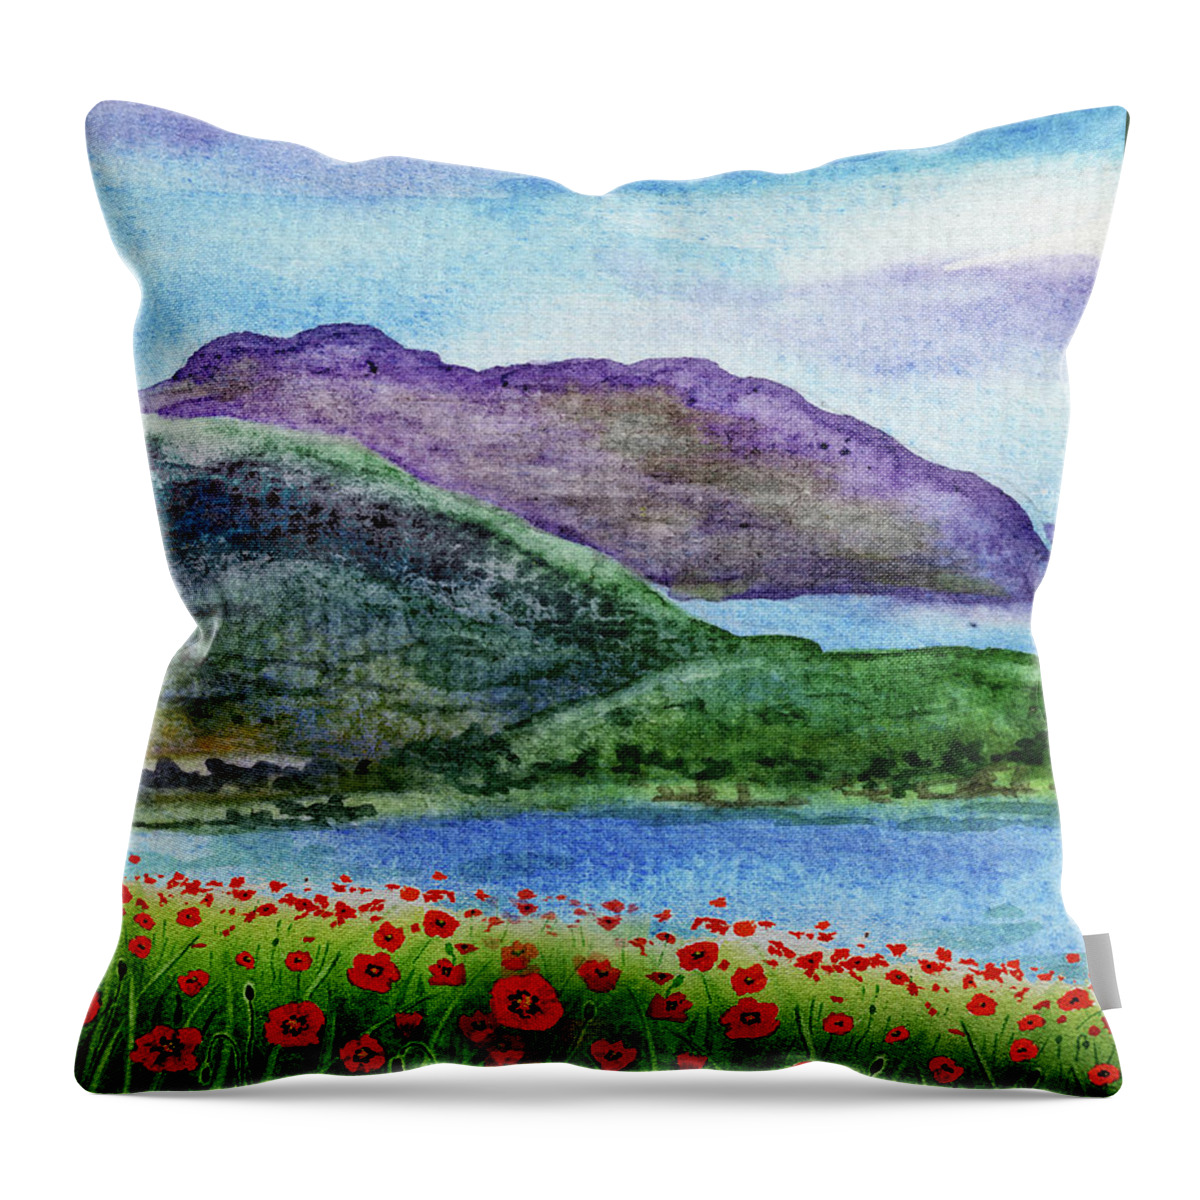 Poppies Throw Pillow featuring the painting Red Poppy Field Blue Lake And Mountains Watercolor by Irina Sztukowski